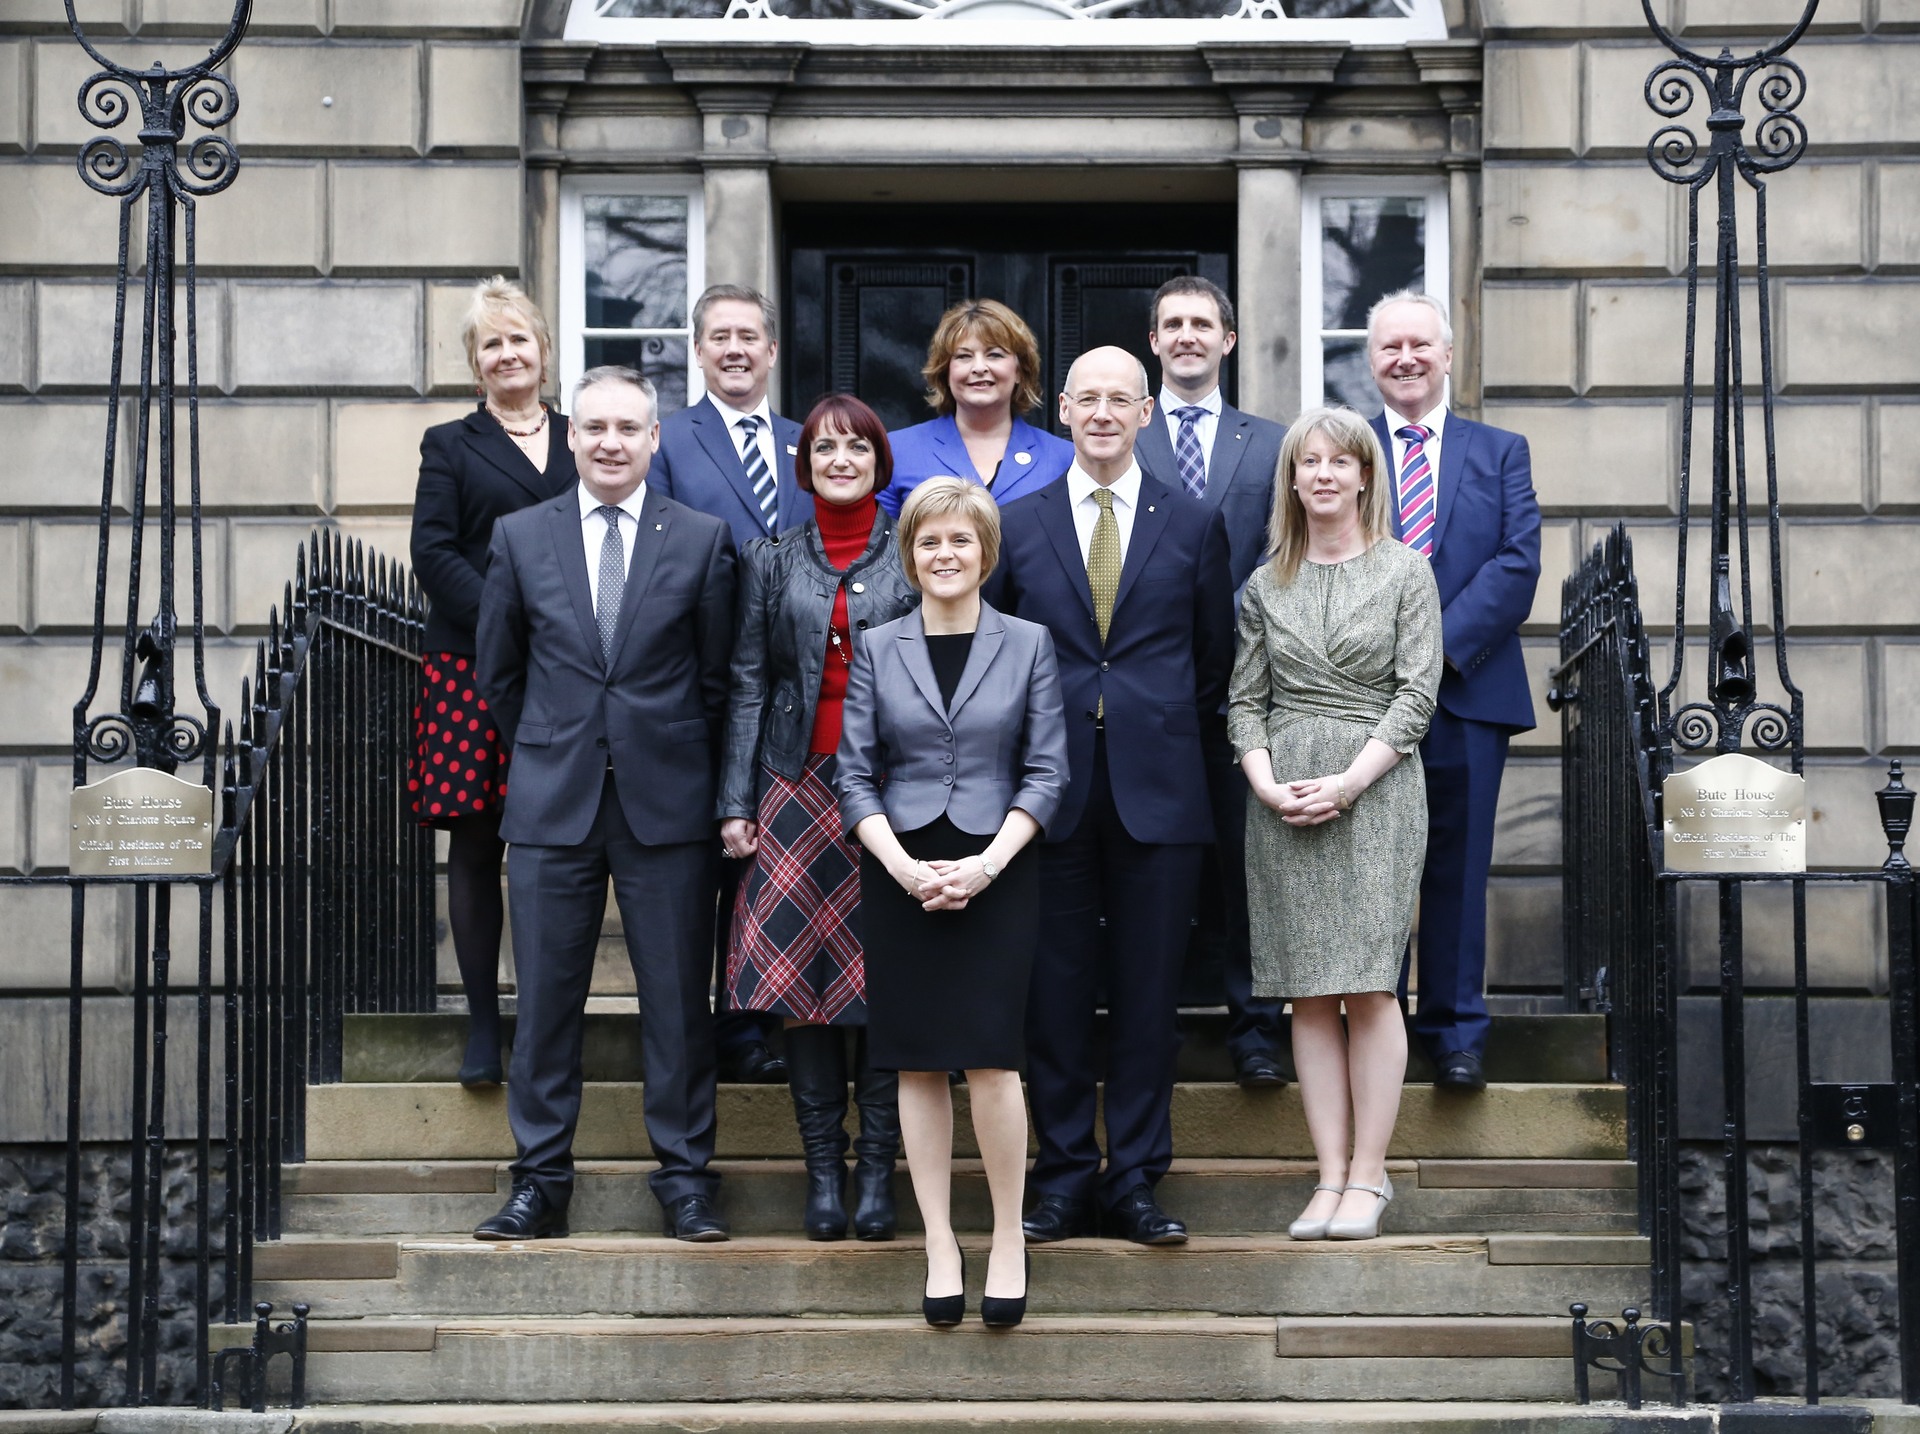 Nicola Sturgeon took over as First Minister from Alex Salmond after the 2014 Scottish independence referendum.